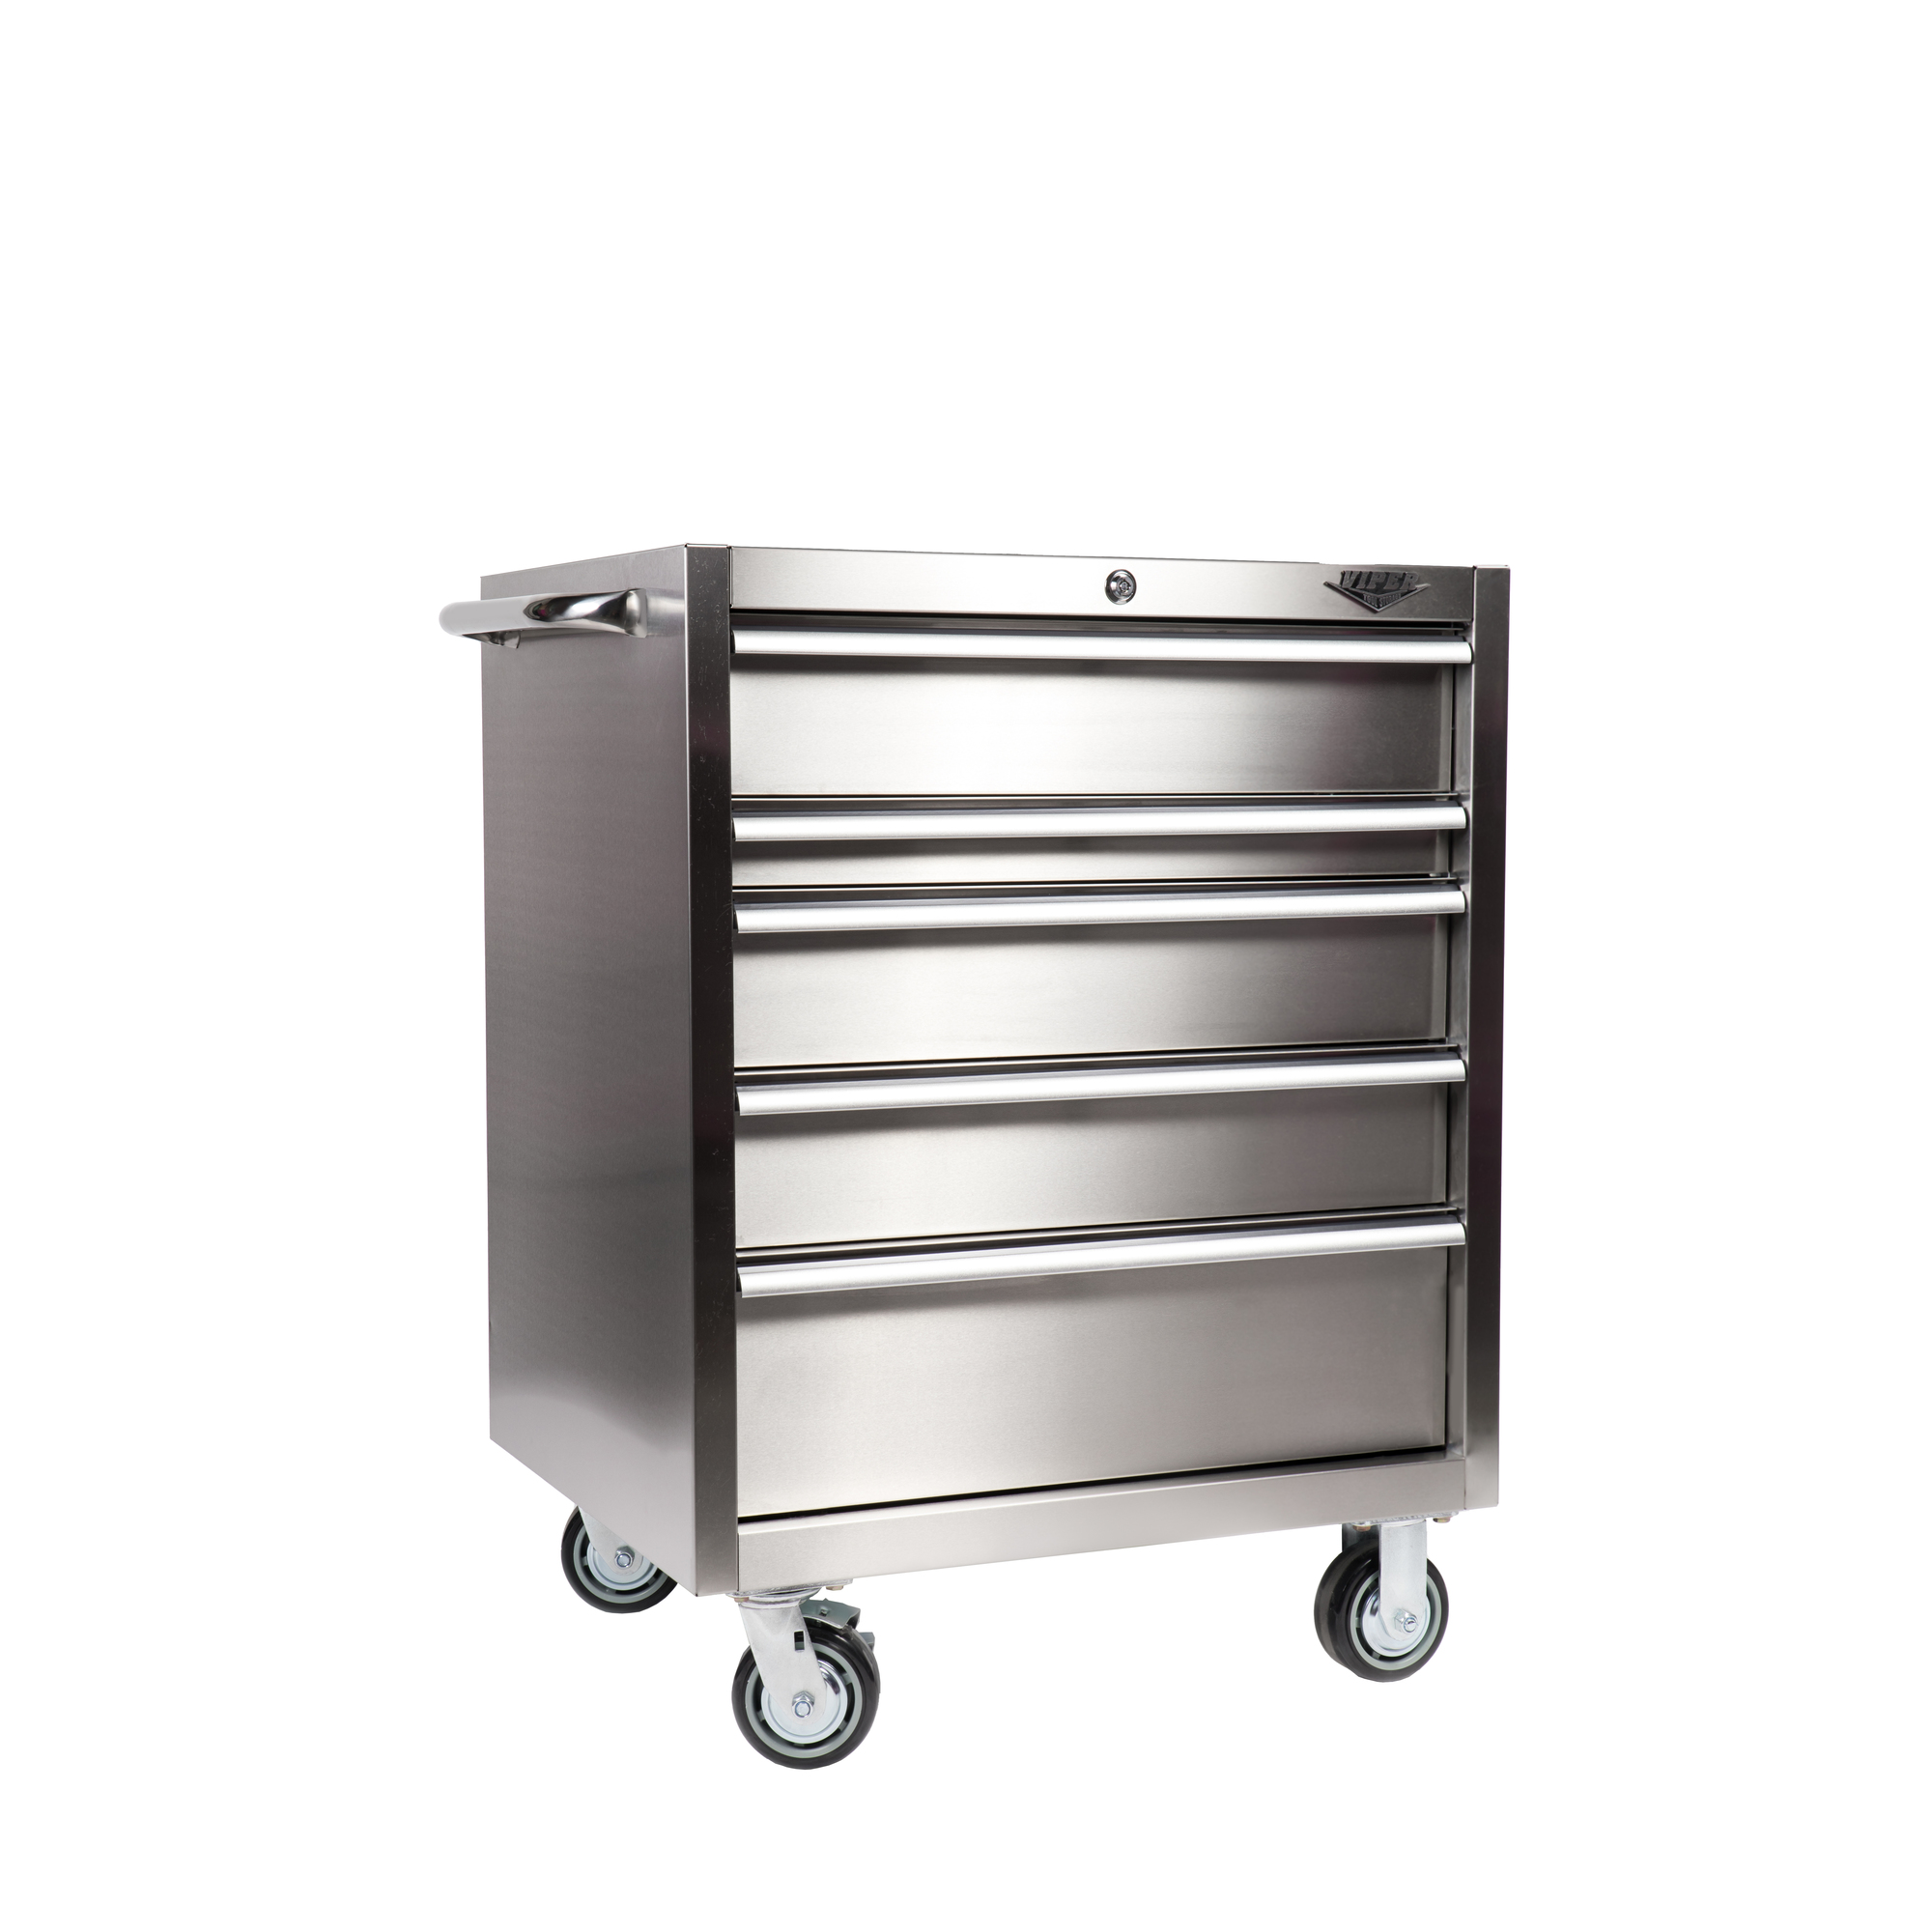 Viper Tool Storage, 5-Drawer 304 Stainless Steel Rolling Cabinet, Width 30 in, Height 41 in, Color Stainless Steel, Model V300541SSR